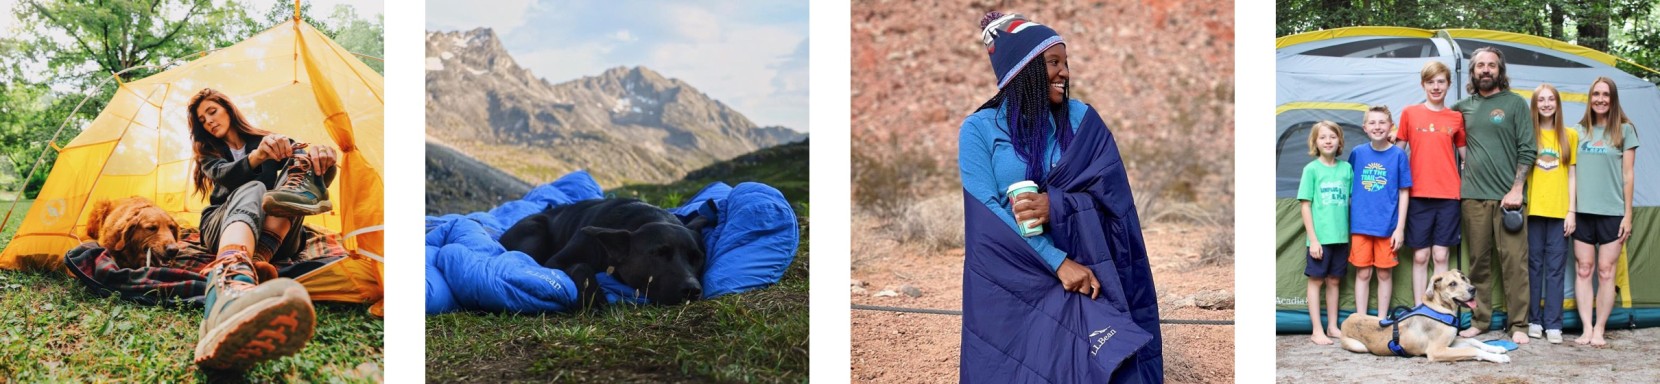 4 images of different people camping in various setting.